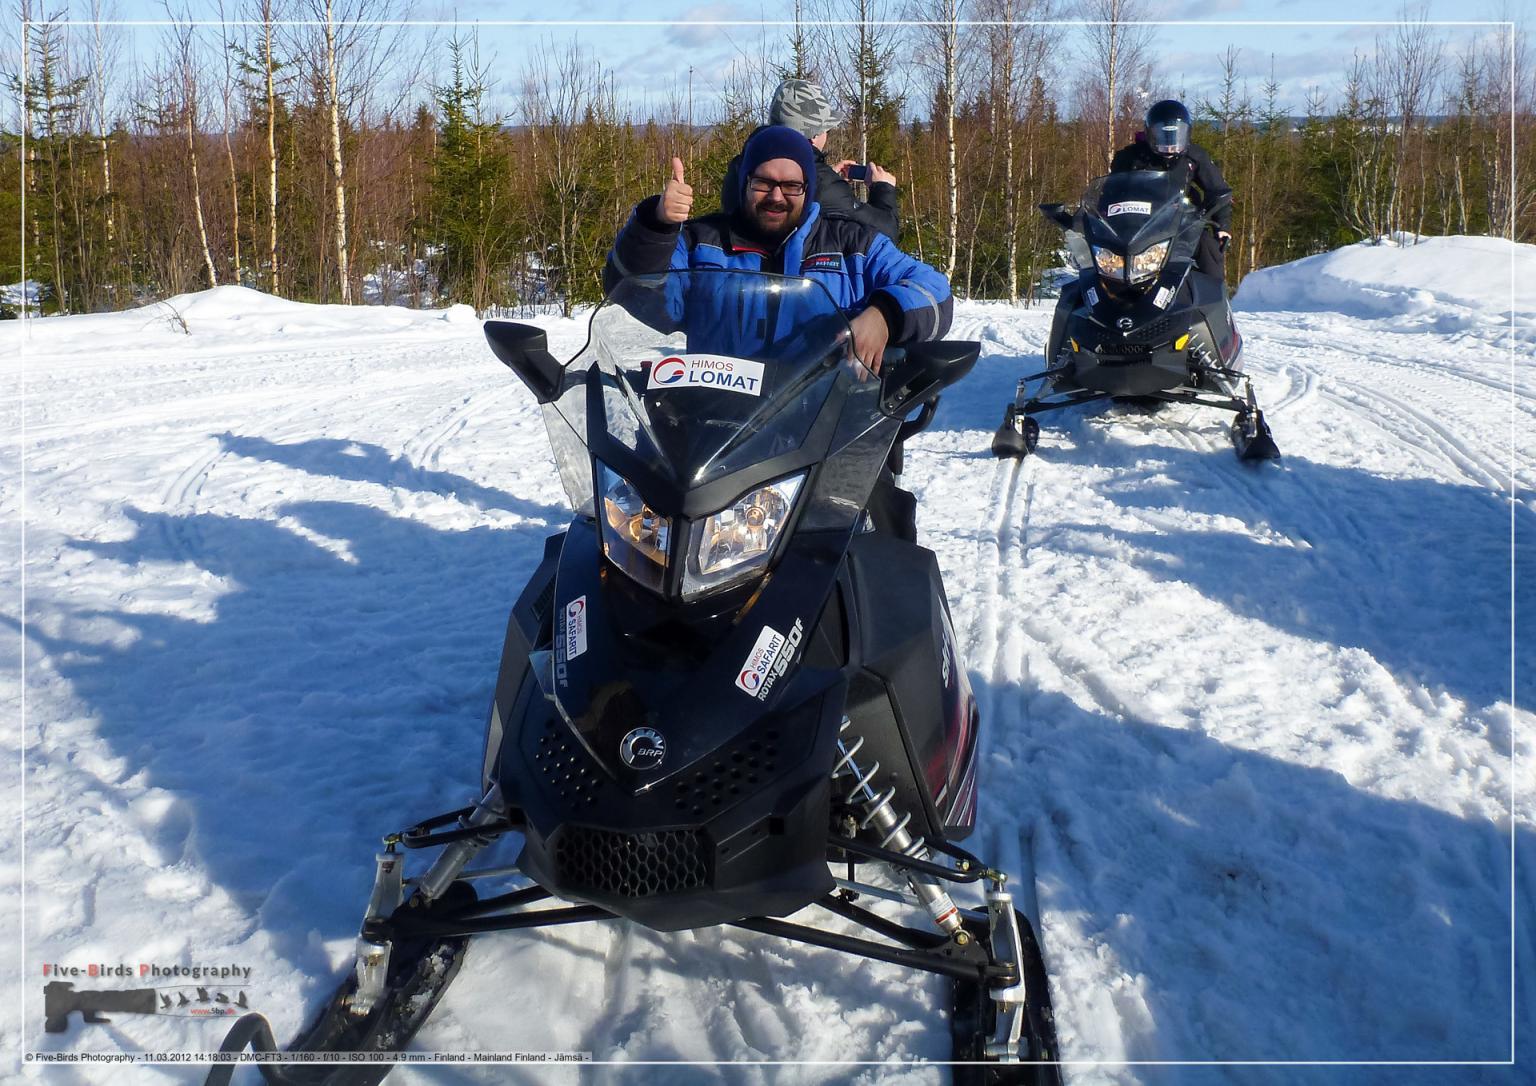 Me on the snowmobile near the city of Jämsä during our skidoo tour